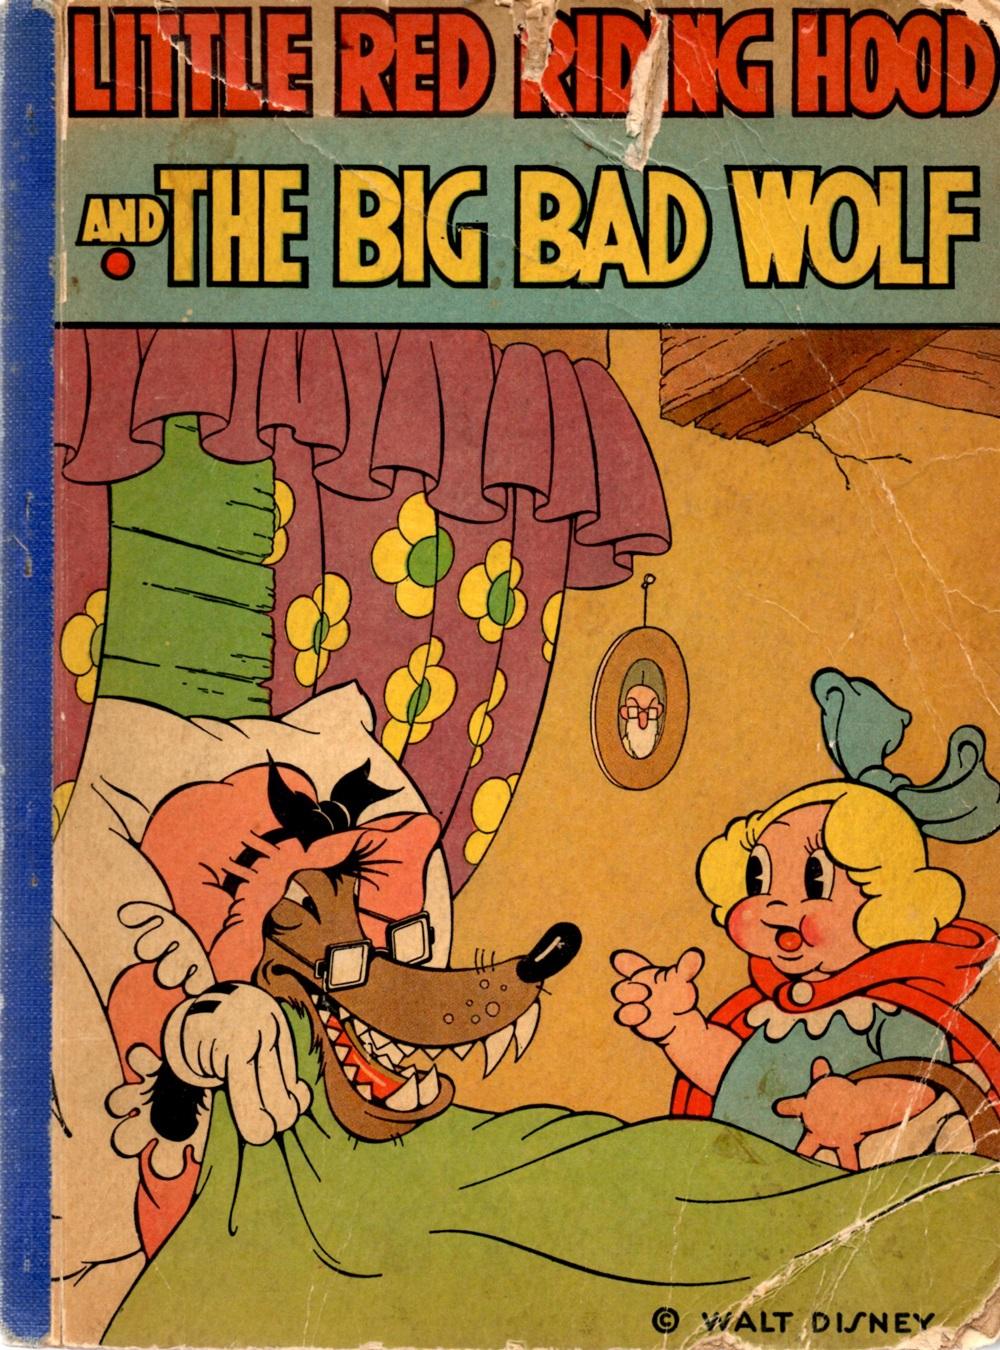 Little Red Riding Hood and the Big Bad Wolf by Staff of the Walt Disney Reading Copy Paperback (1934) | Book